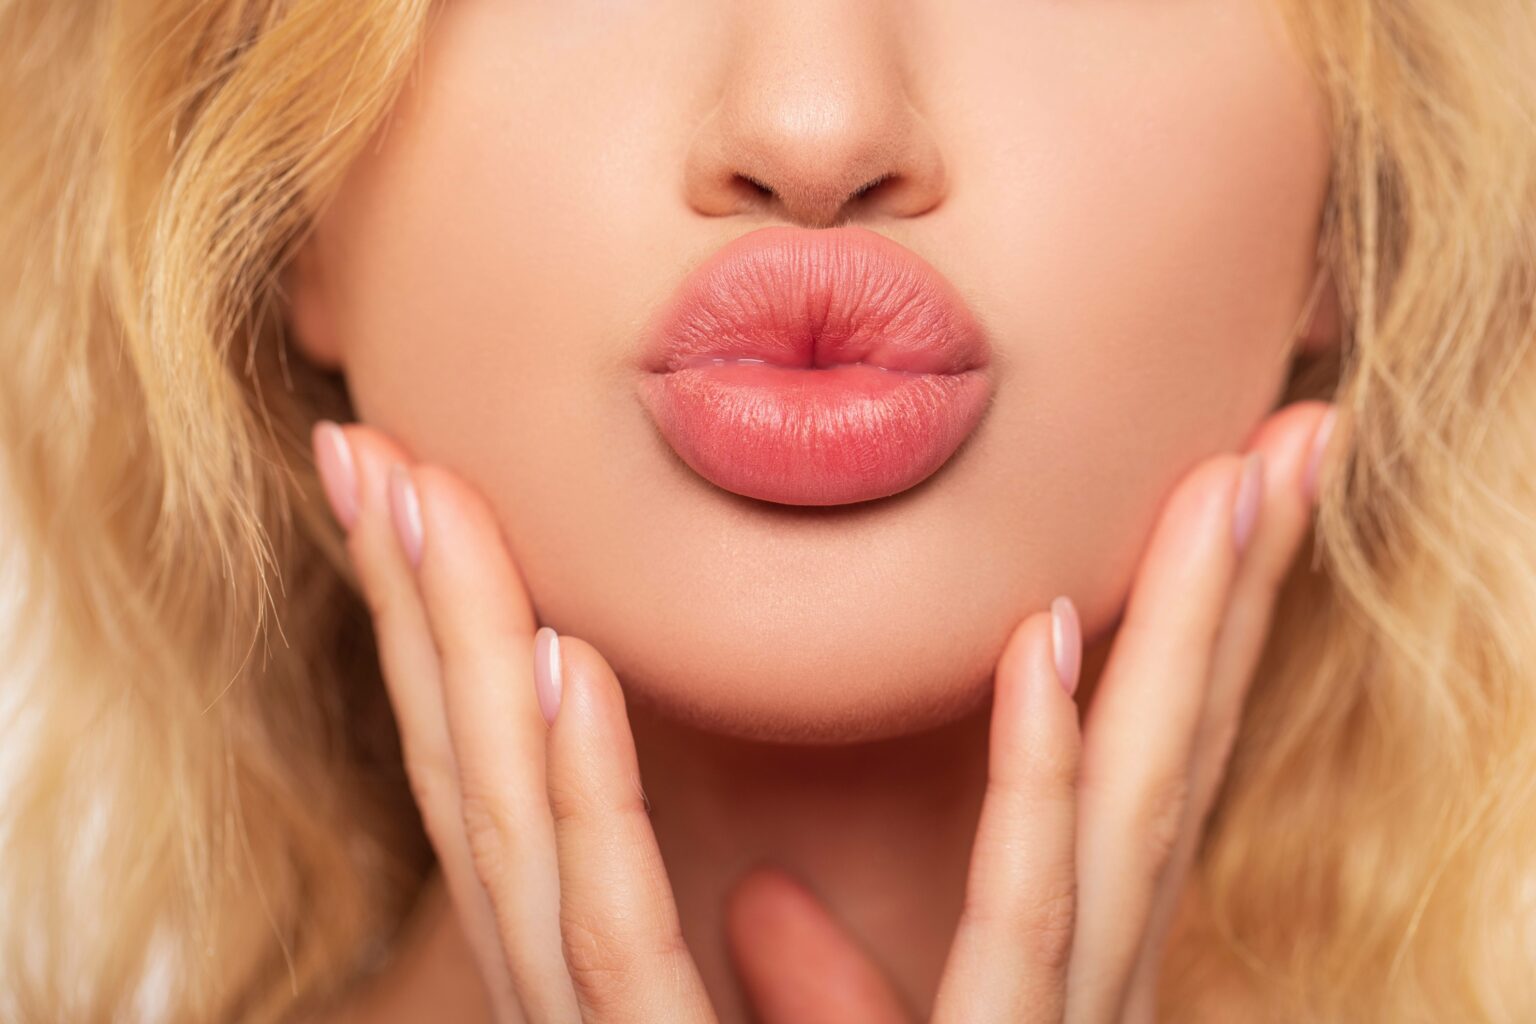 How much do lip fillers cost in Eau Claire?